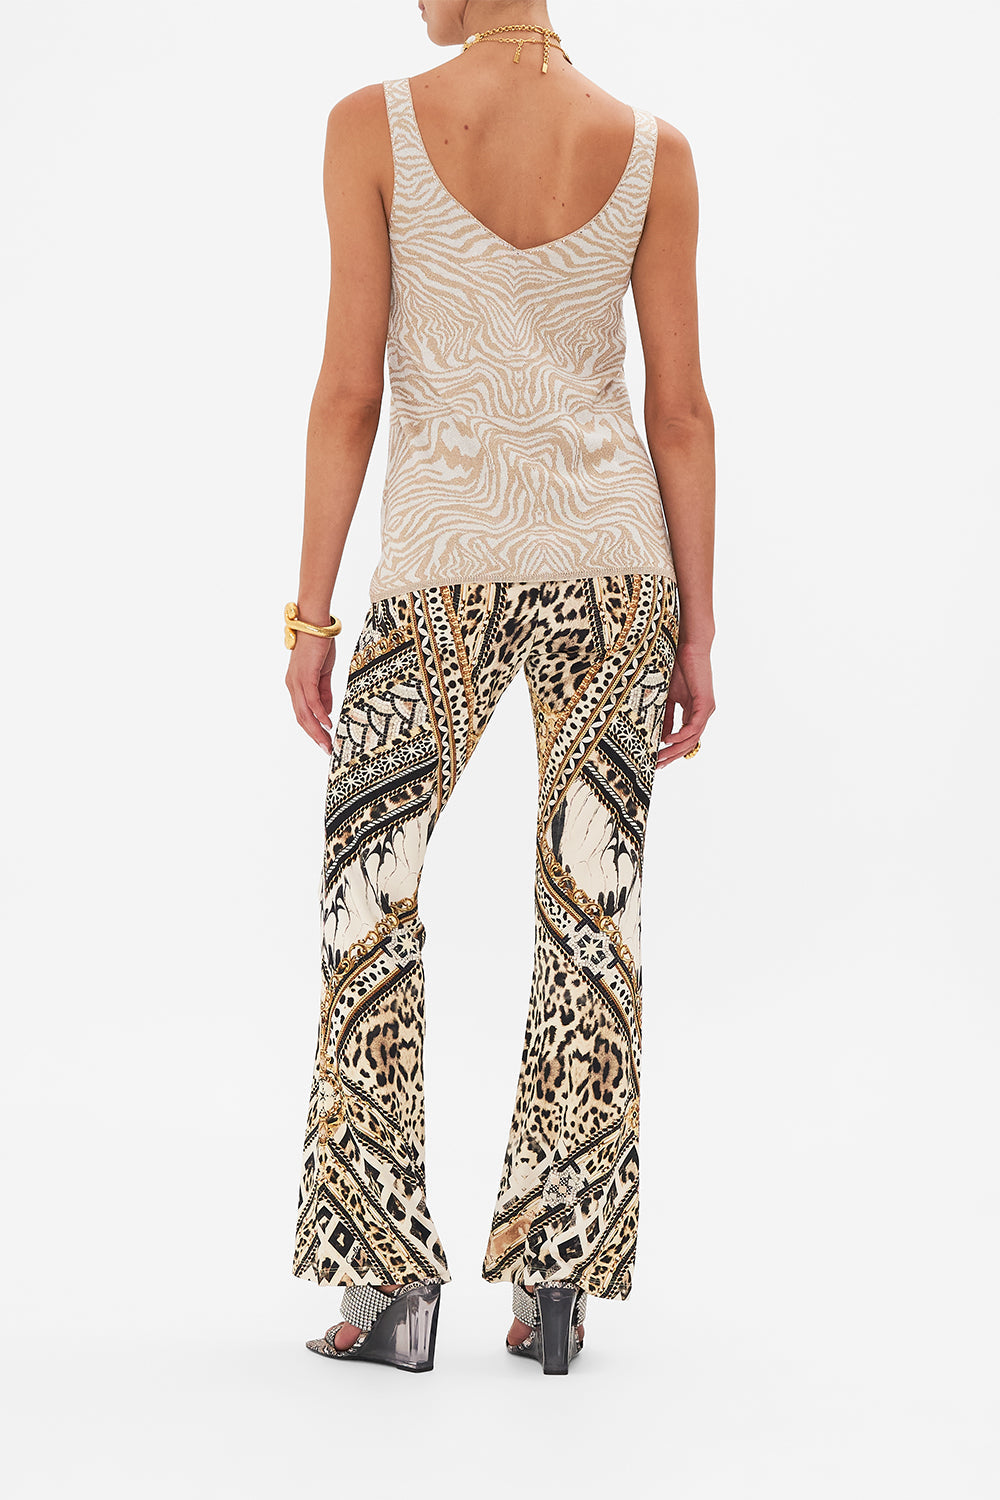 Product view of CAMILLA designer animal print knit top in Mosaic Muse 